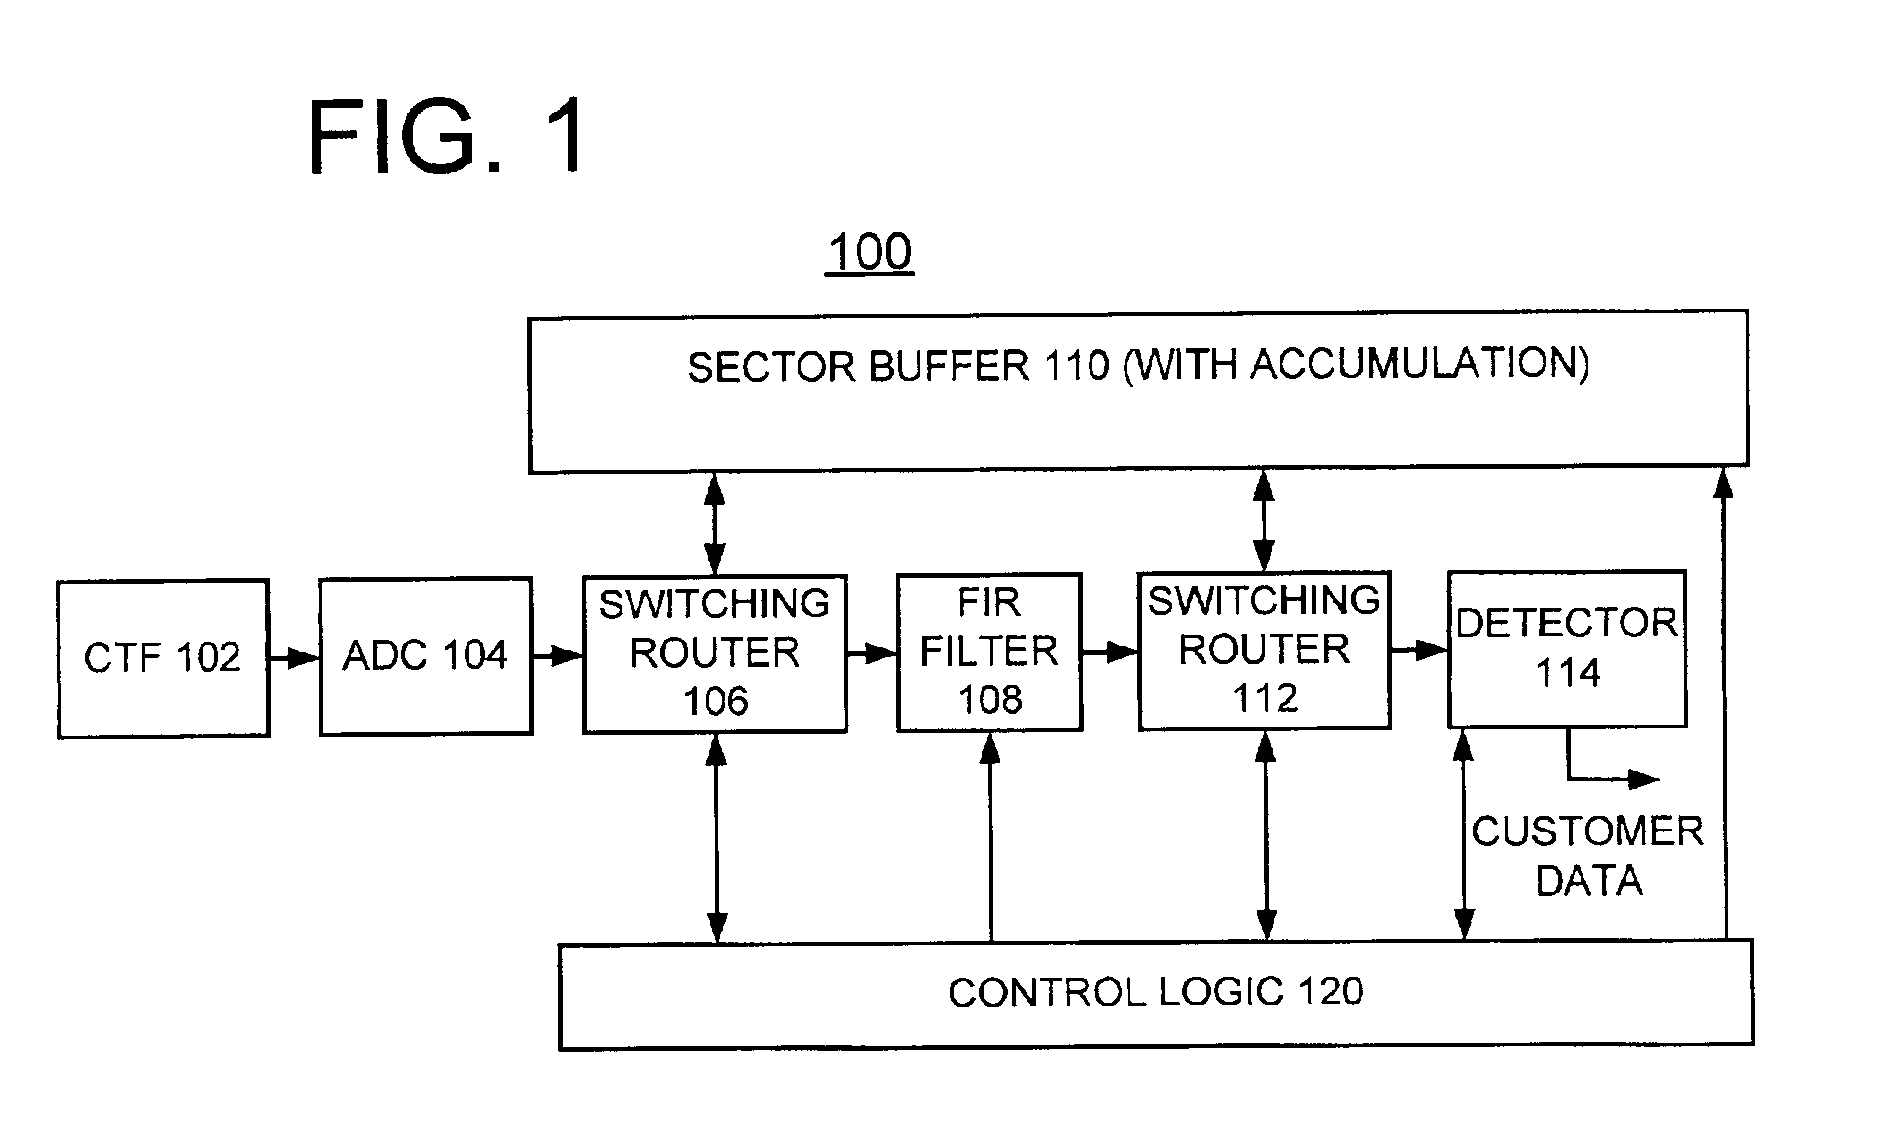 Method and apparatus for enhanced data channel performance using read sample buffering